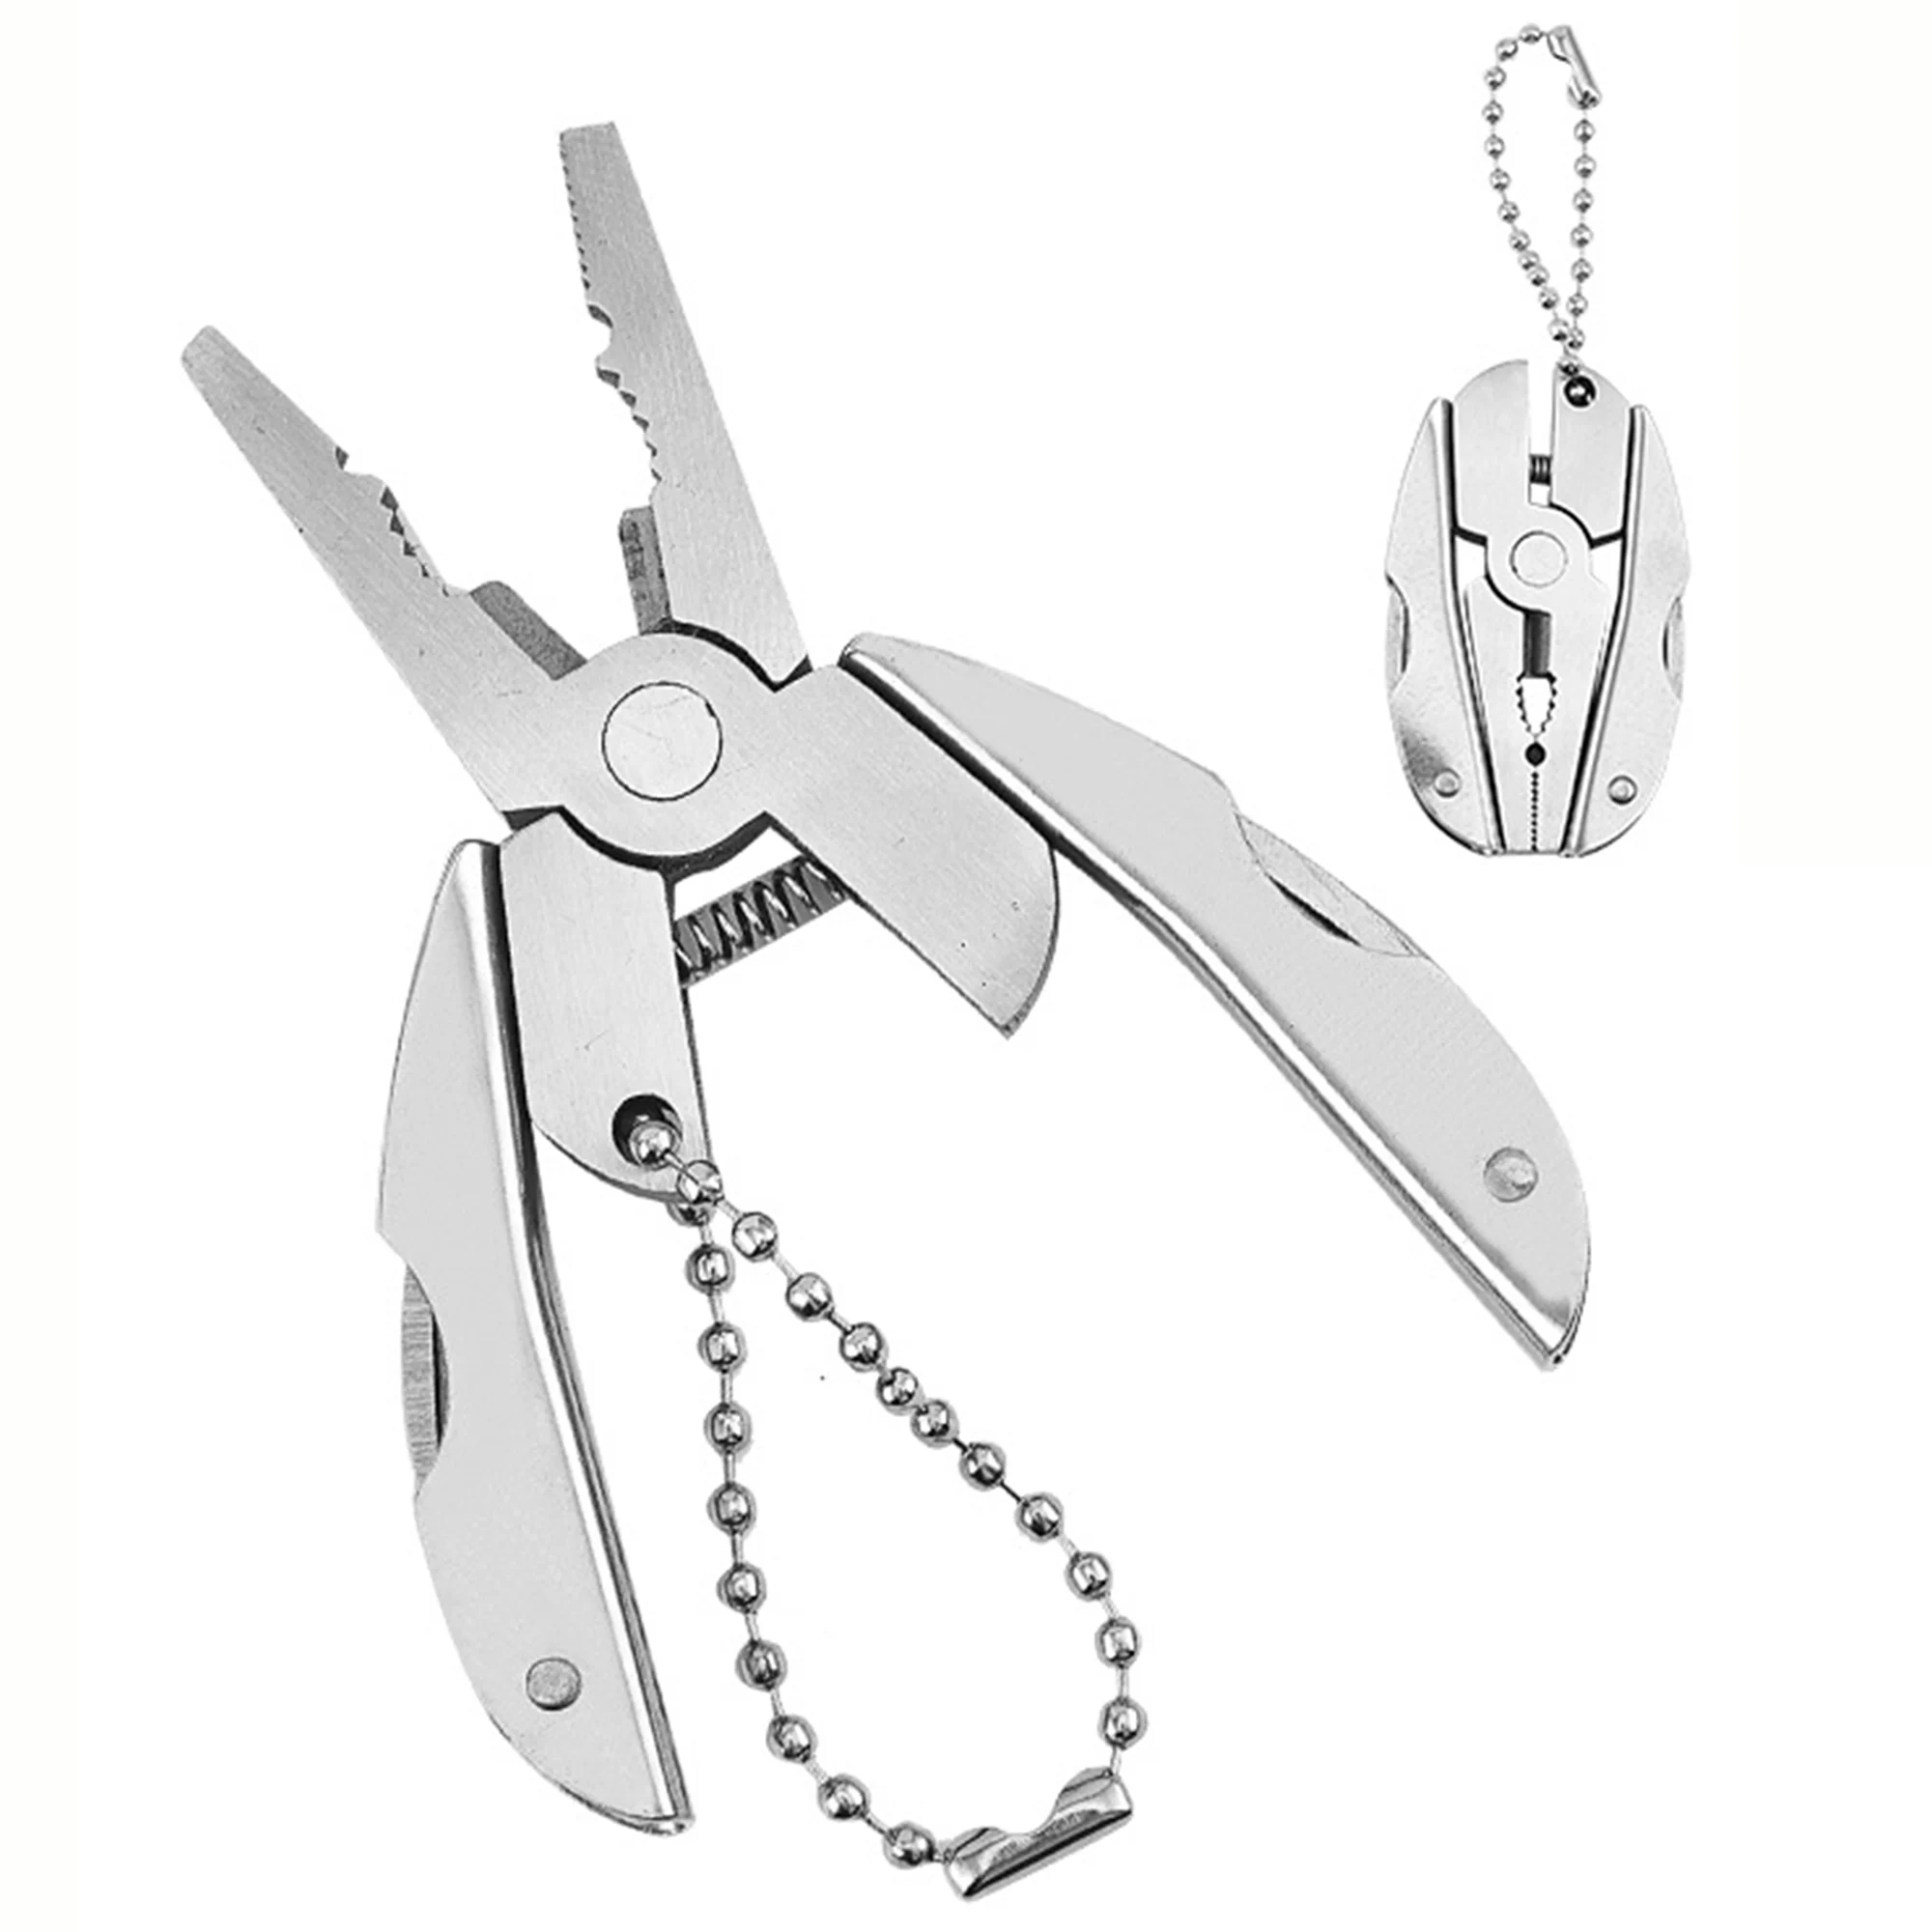 Pocket-Sized Multifunctional Keychain Tool - Mini Pliers with Wire Stripper, Phillips Screwdriver, Knife, File, Flat Screwdriver